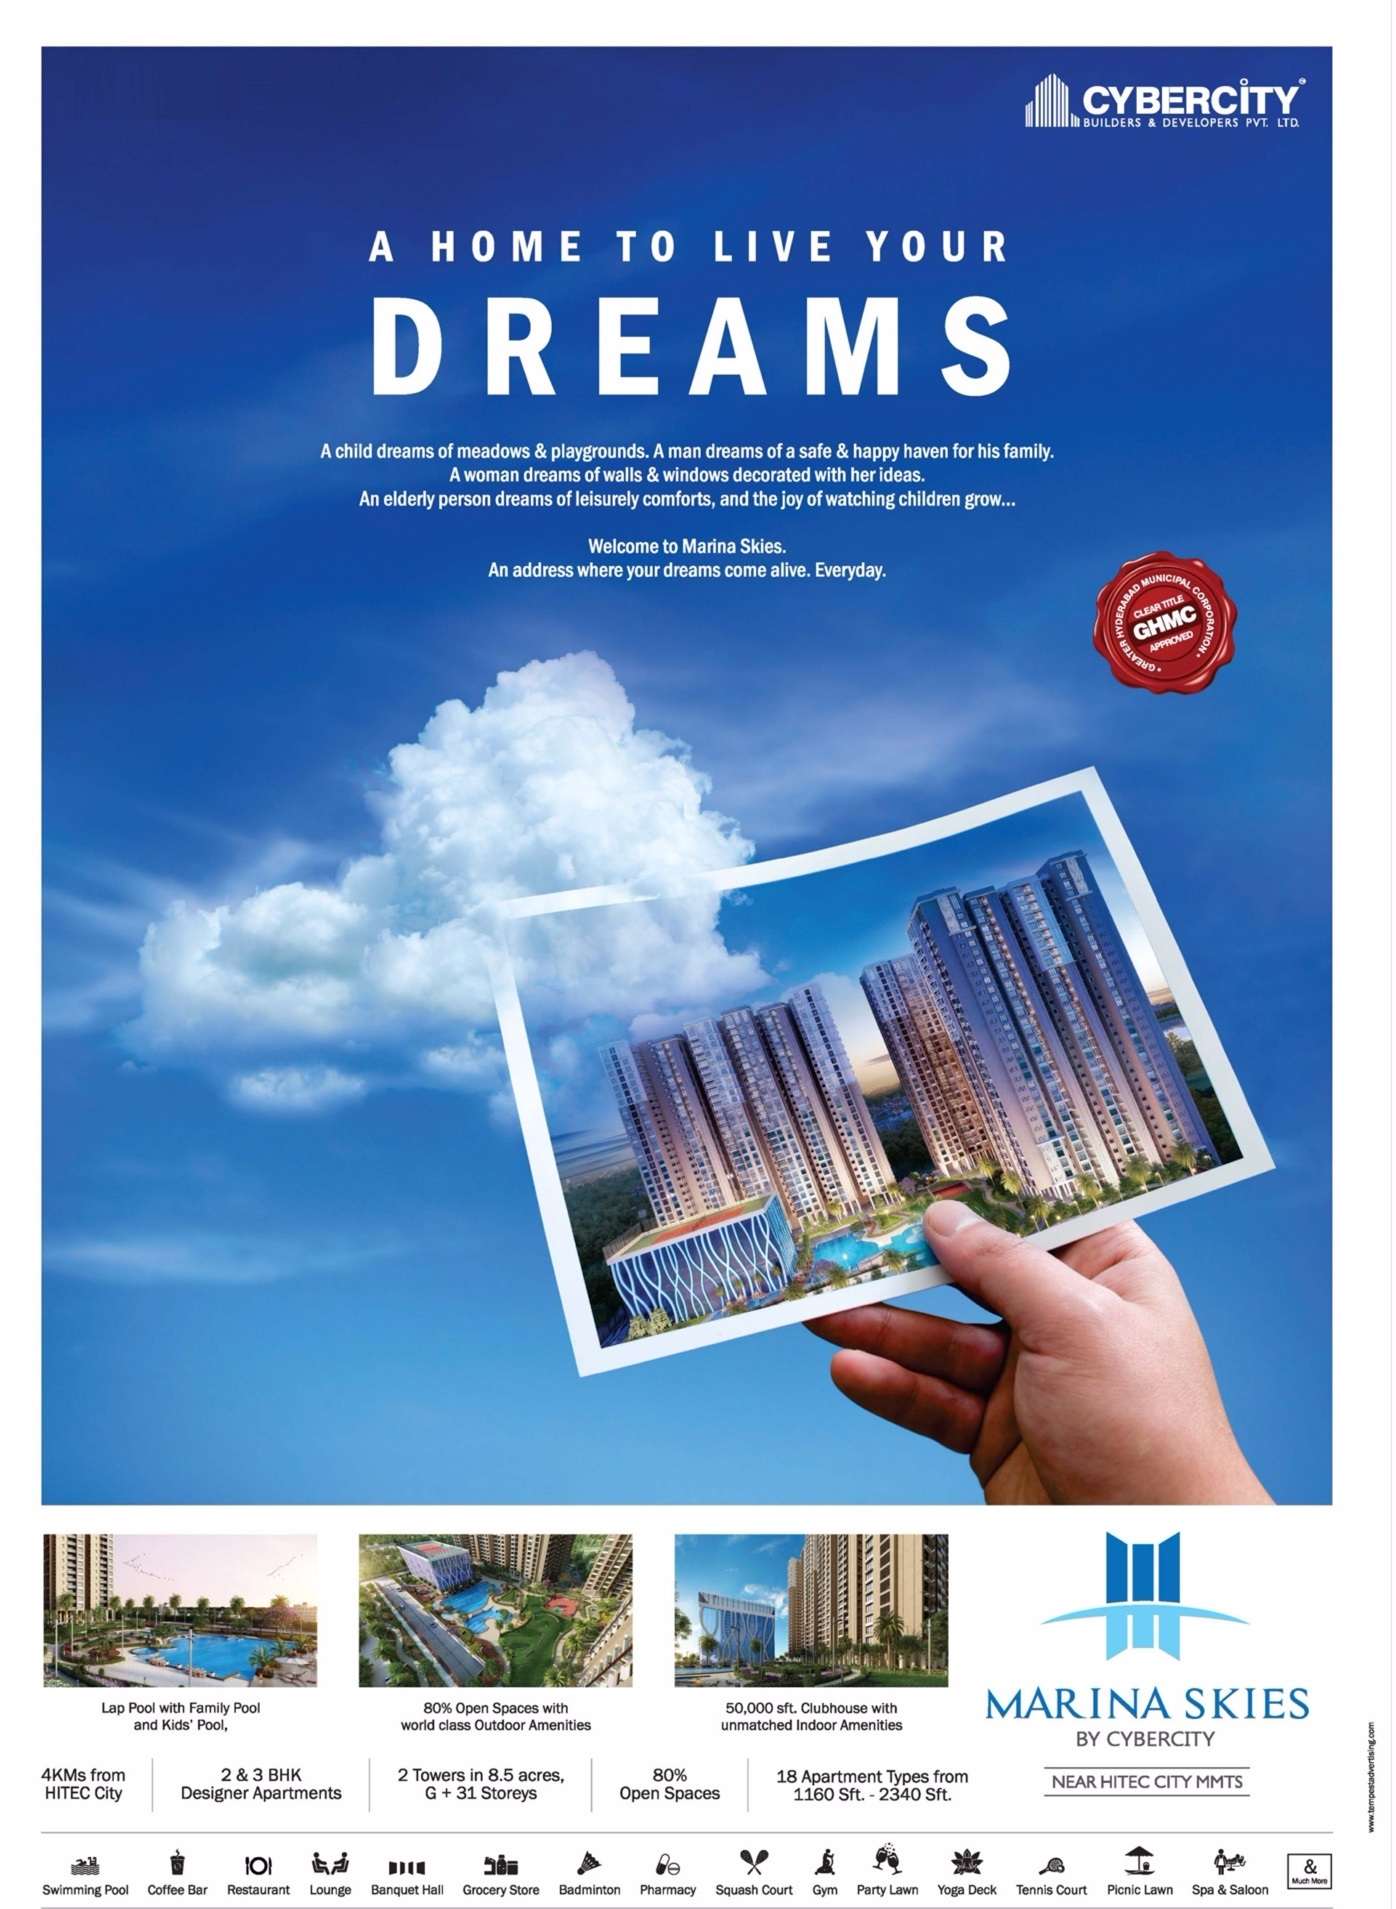 Welcome to an address where your dreams come alive everyday at Cybercity Marina Skies in Hyderabad